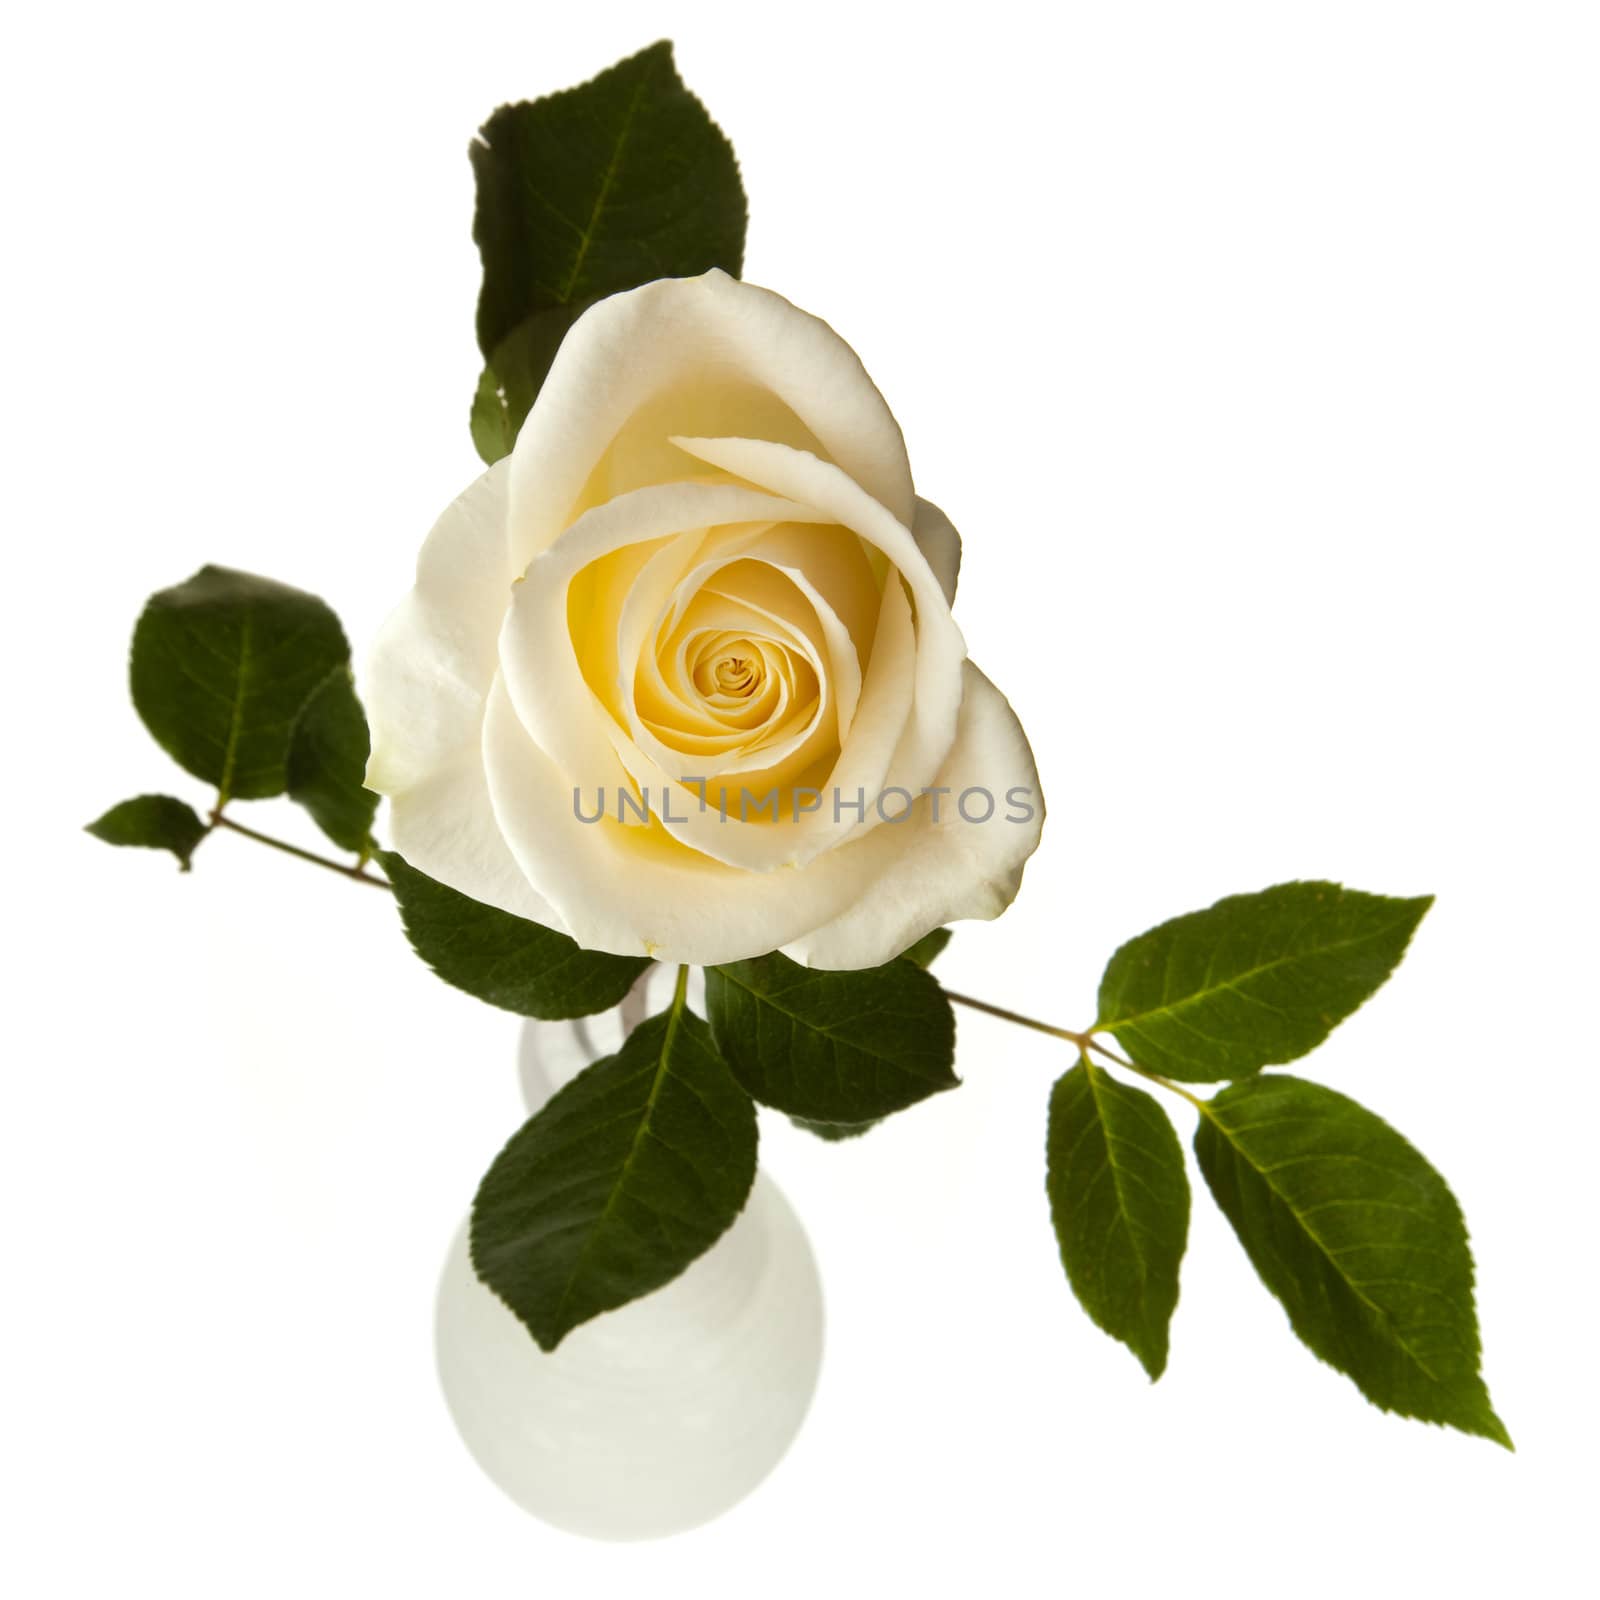 Beautiful white roses in a round white vase, photographed from above, on a white background